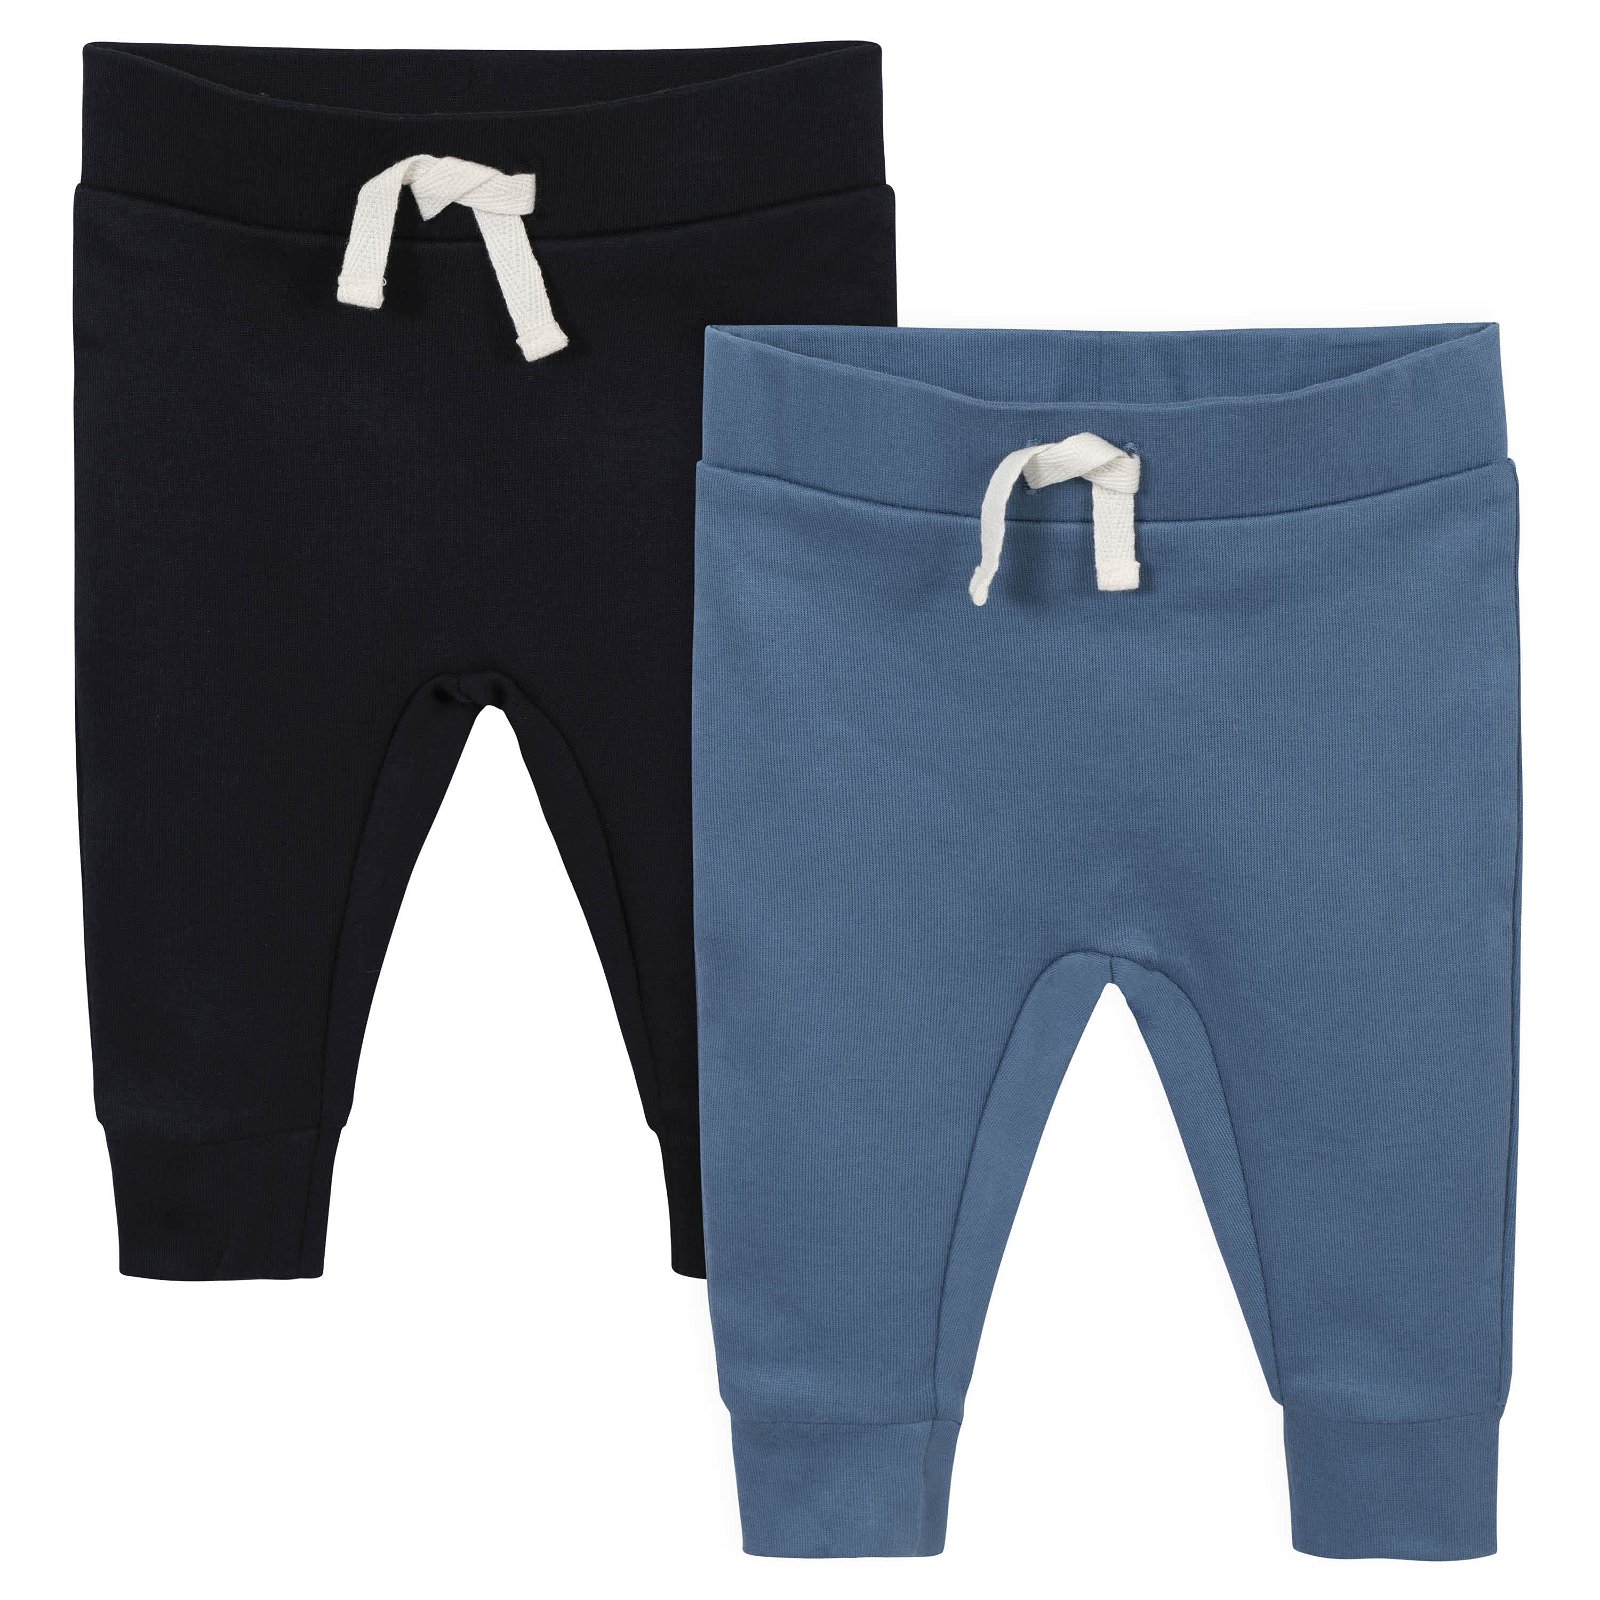 Image of 2-Pack Baby Boys Comfy Stretch Blue & Black Pants